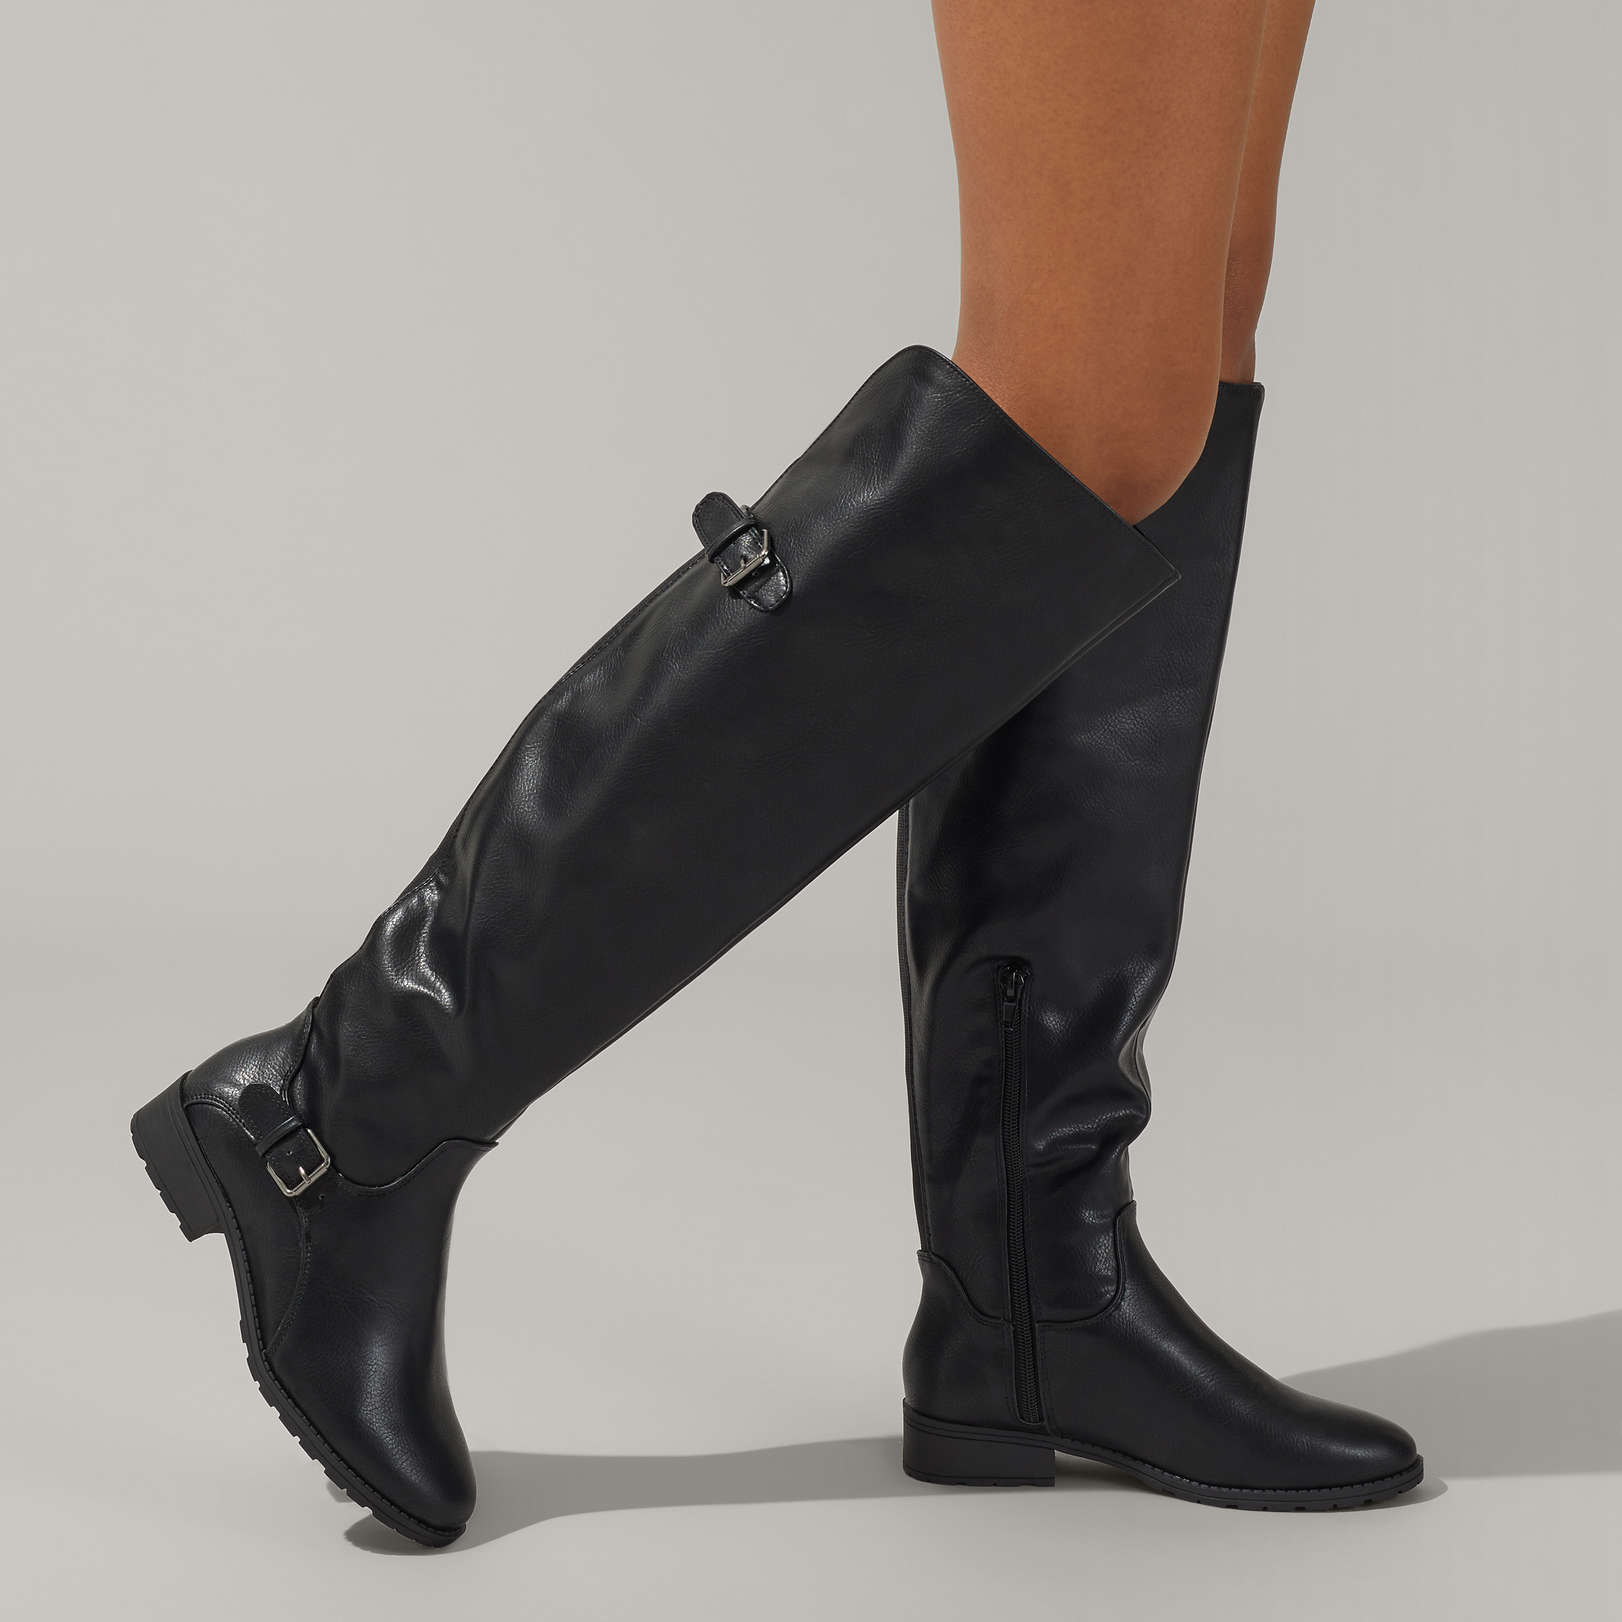 HAPPILY - MISS KG High Leg Boots